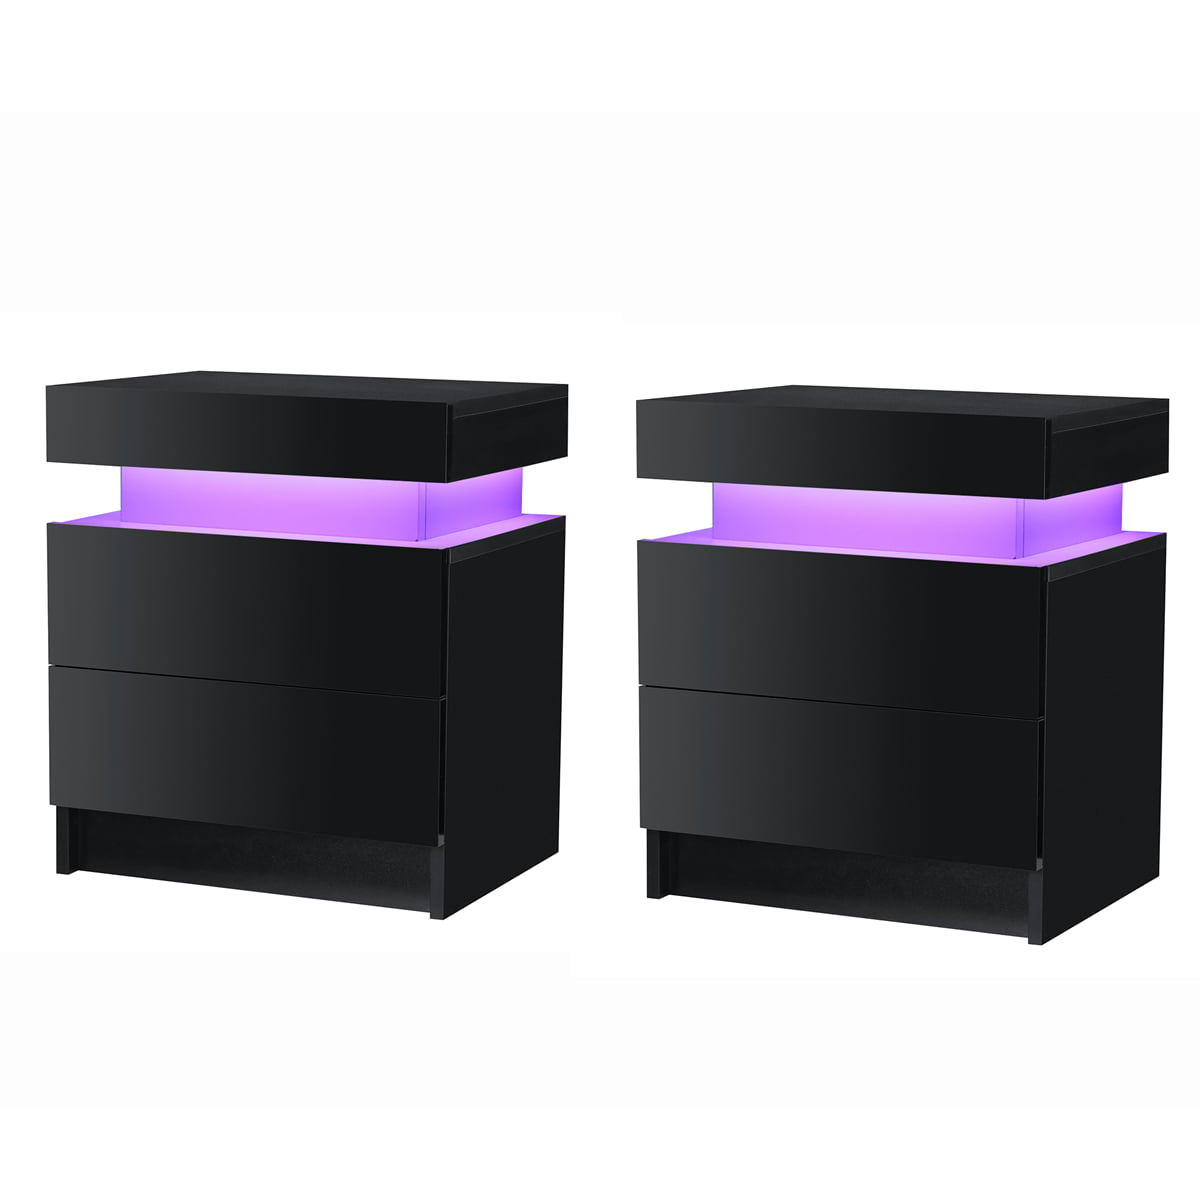 LED Bedside Table with Drawer - Black Gloss Finish